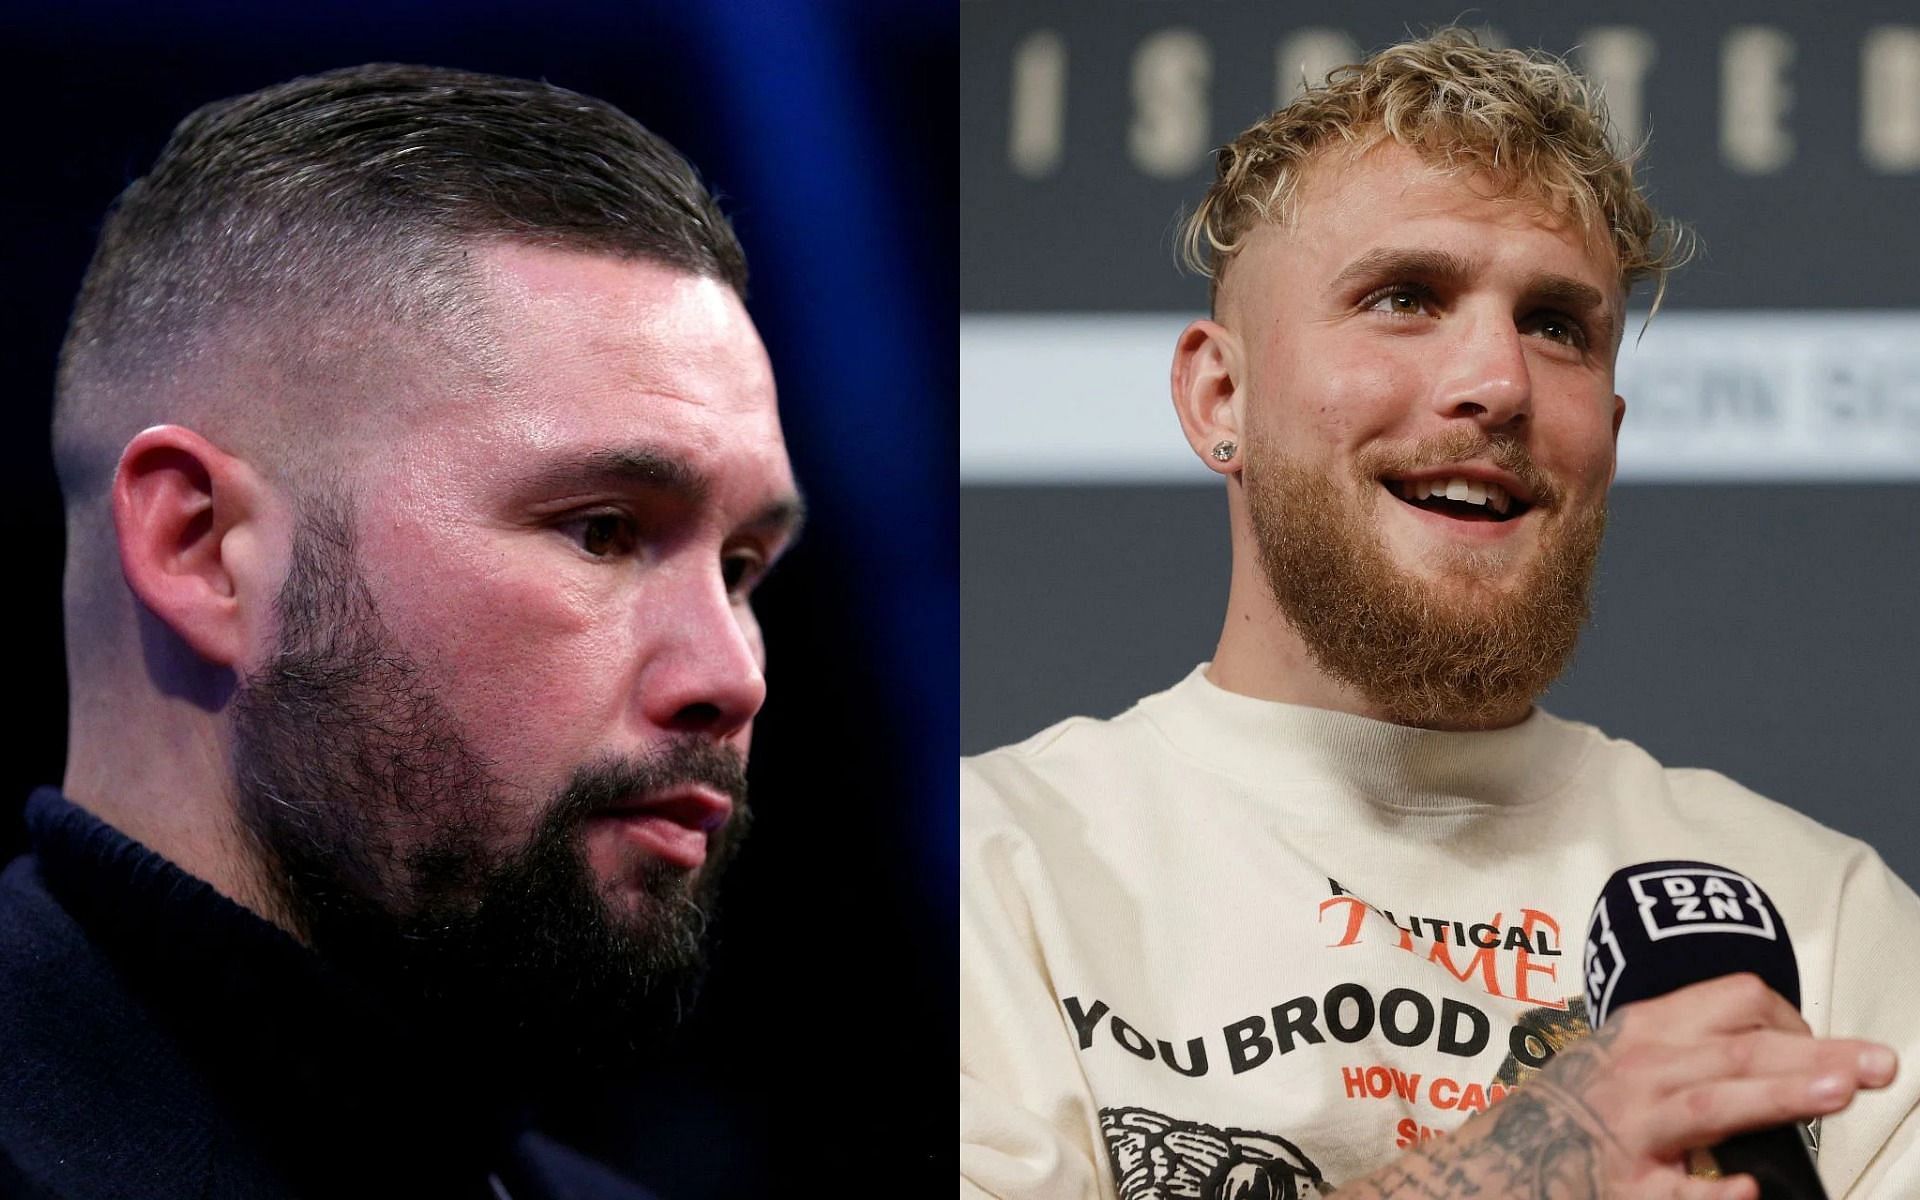 Tony Bellew (L) has given his respect to Jake Paul (R) after their brief beef.